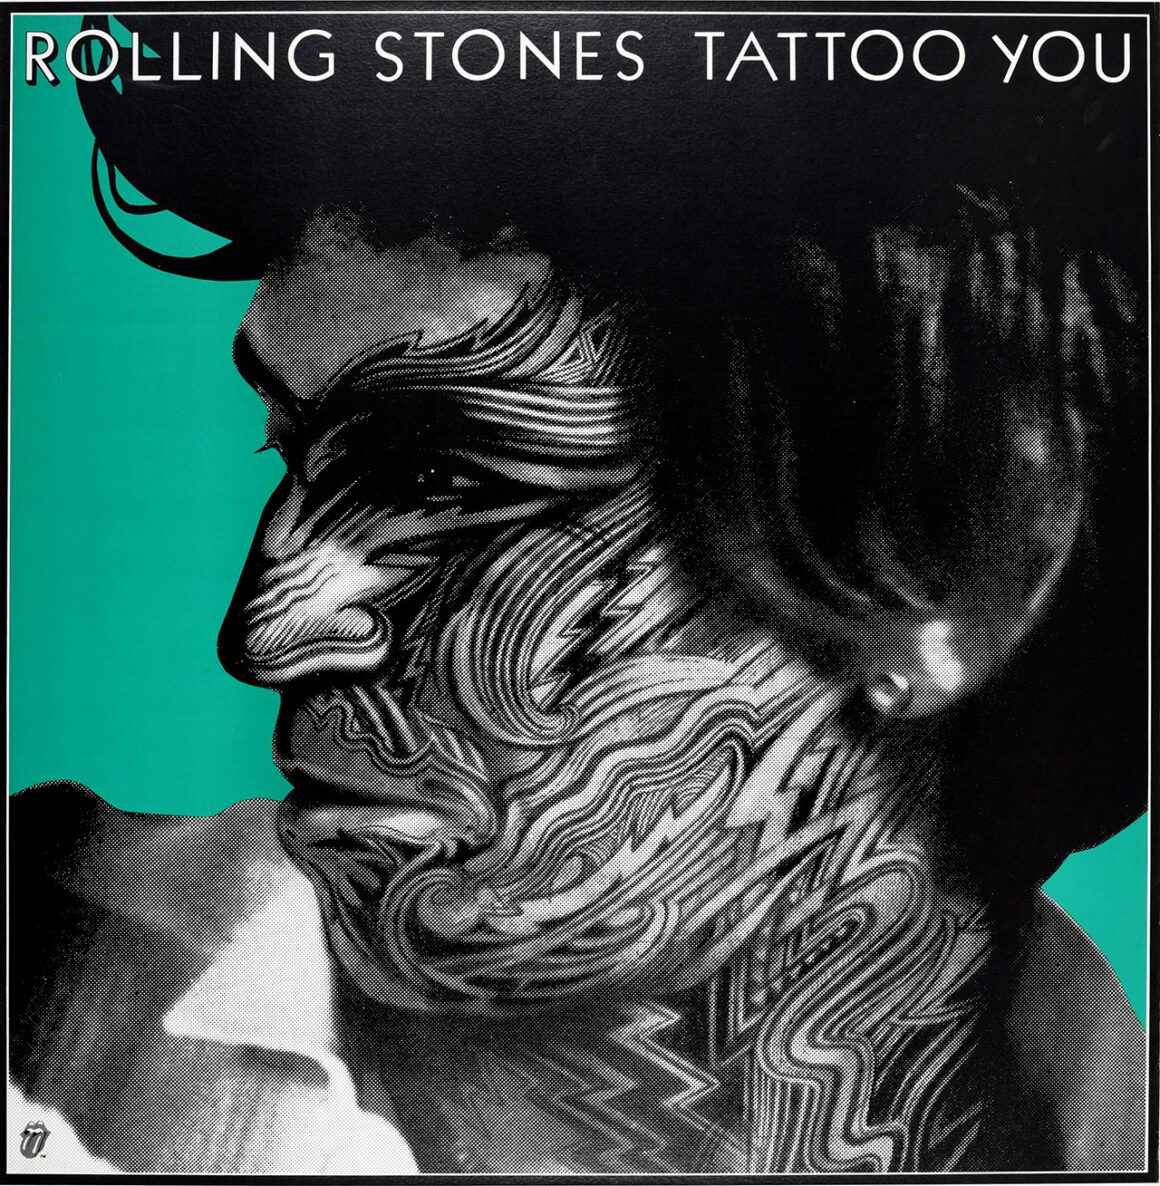 Rolling Stones, Tattoo You, Keith Richards